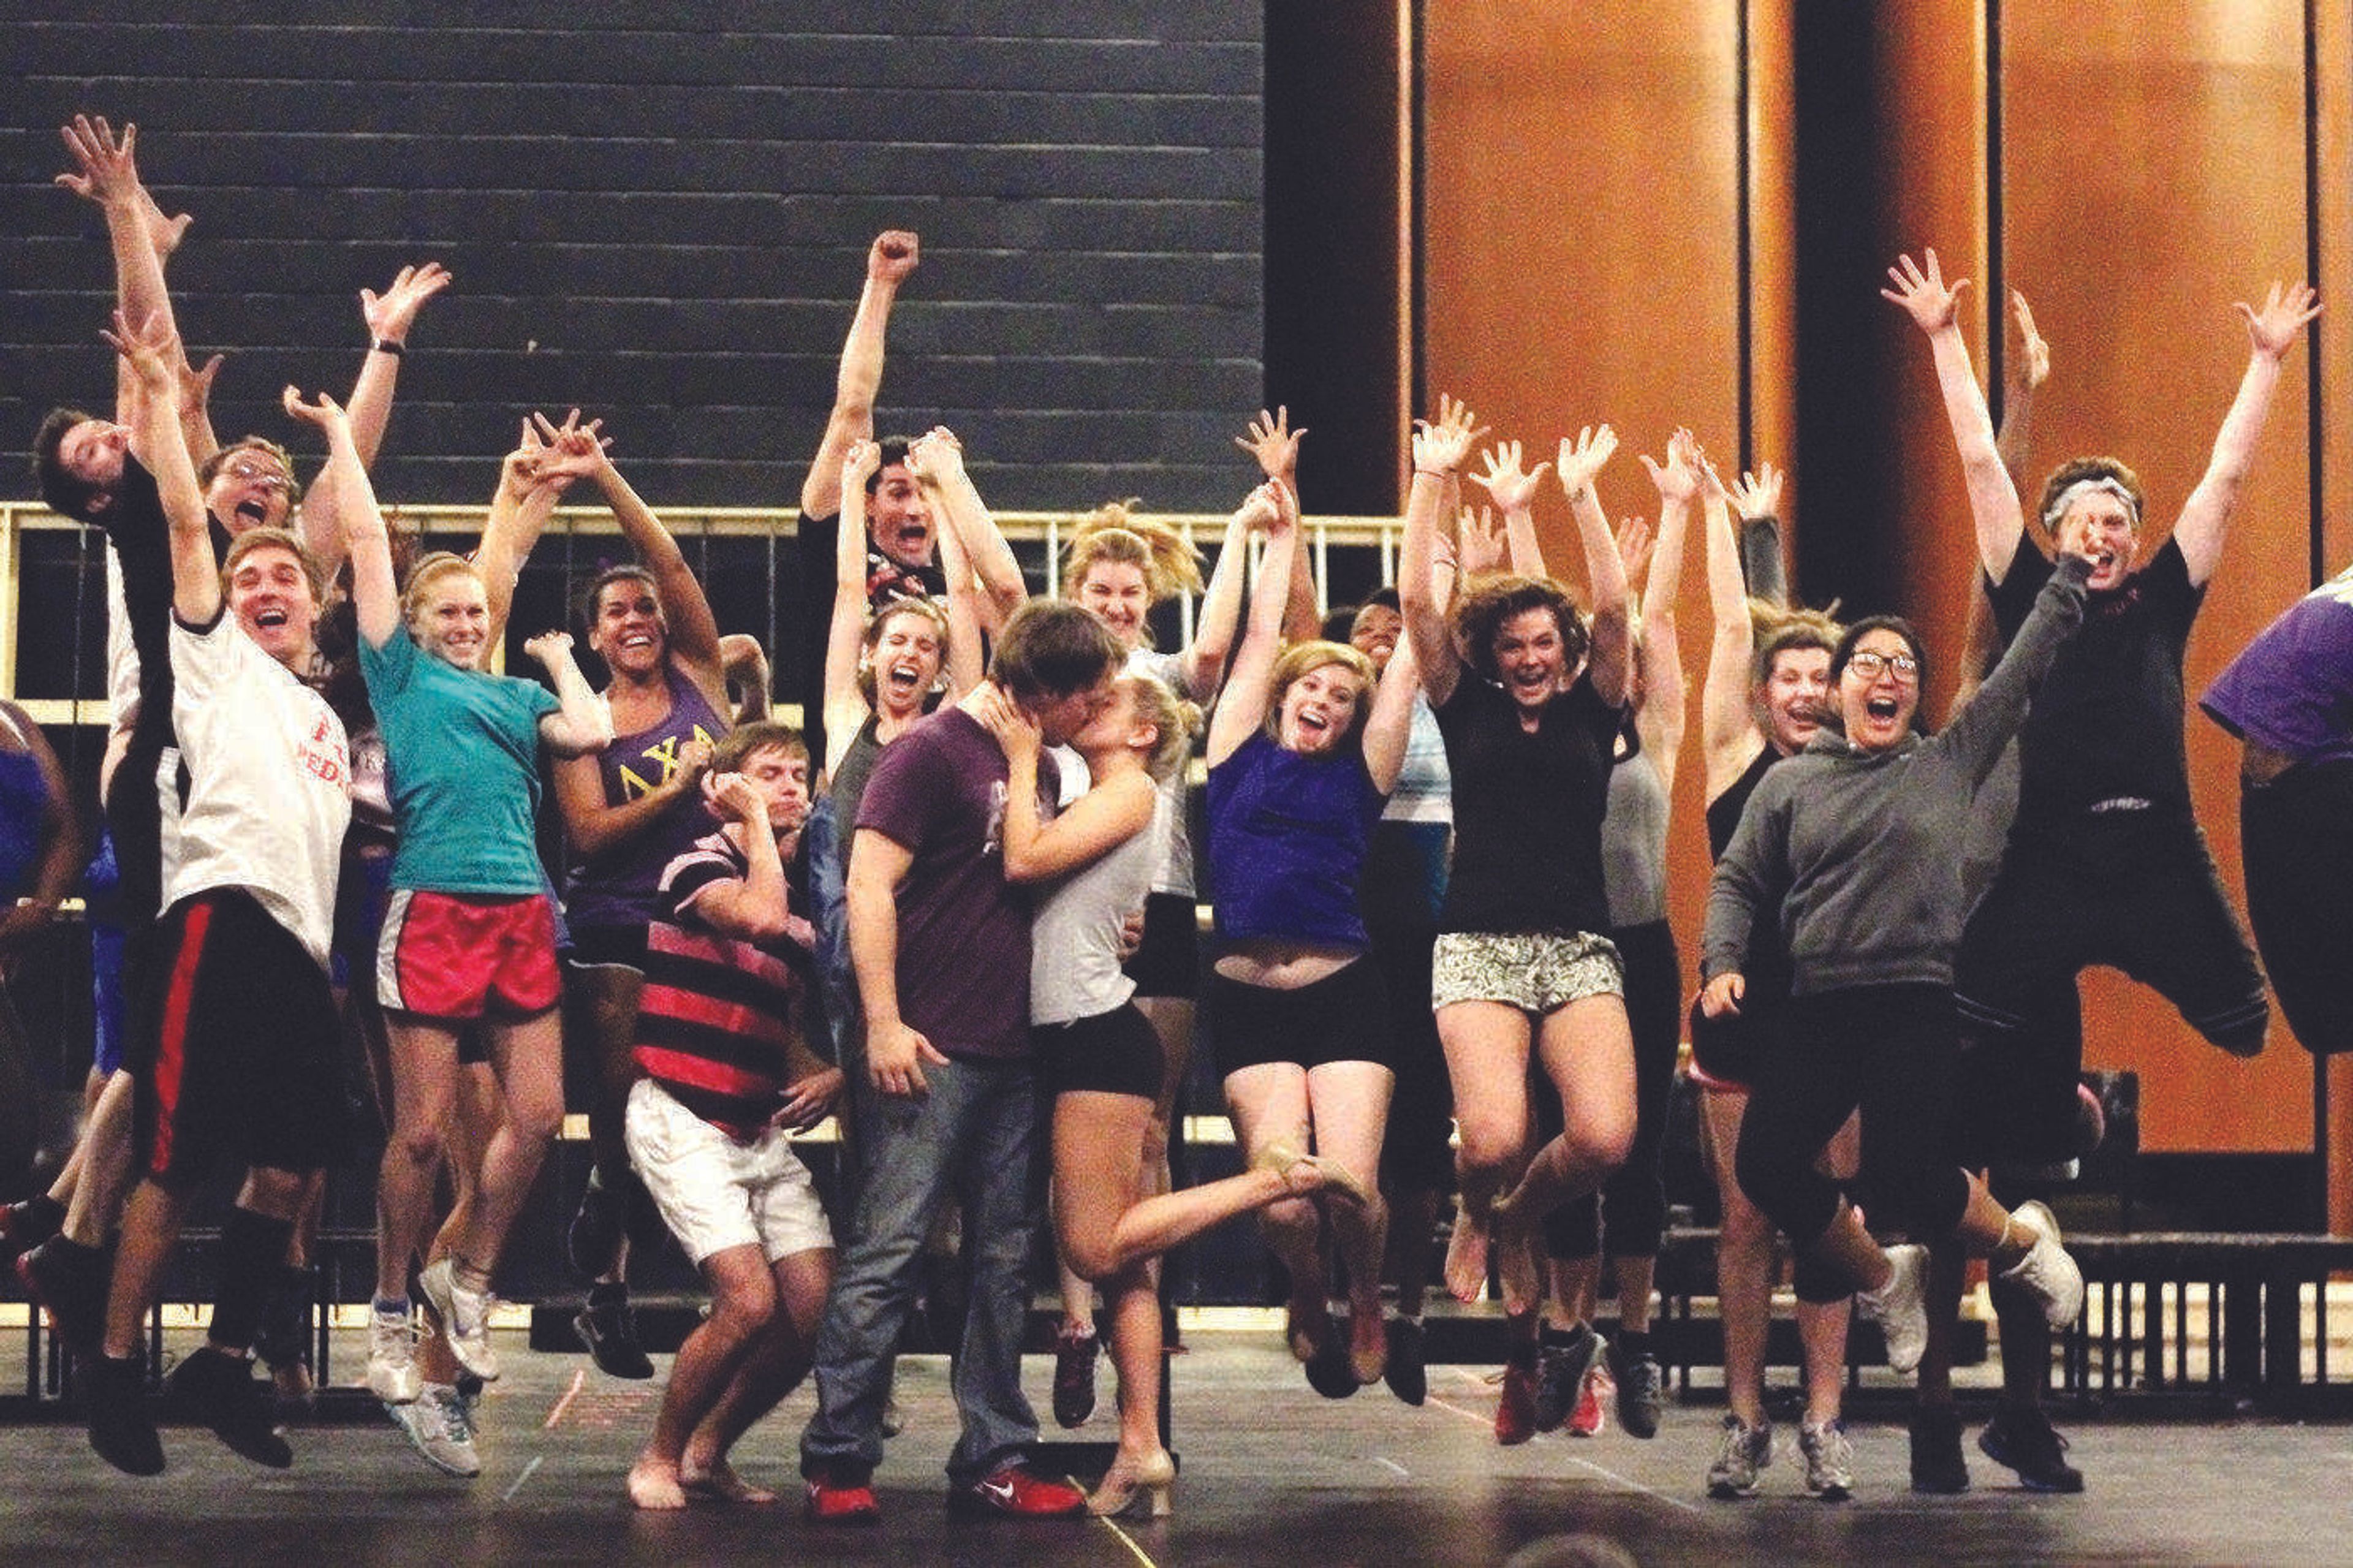 <b> Molly Dowd and Jacob Buckenmeyer embrace during rehearsals of "Legally Blonde" as the rest of the cast watches.</b> Photo by Brittany Thomsen